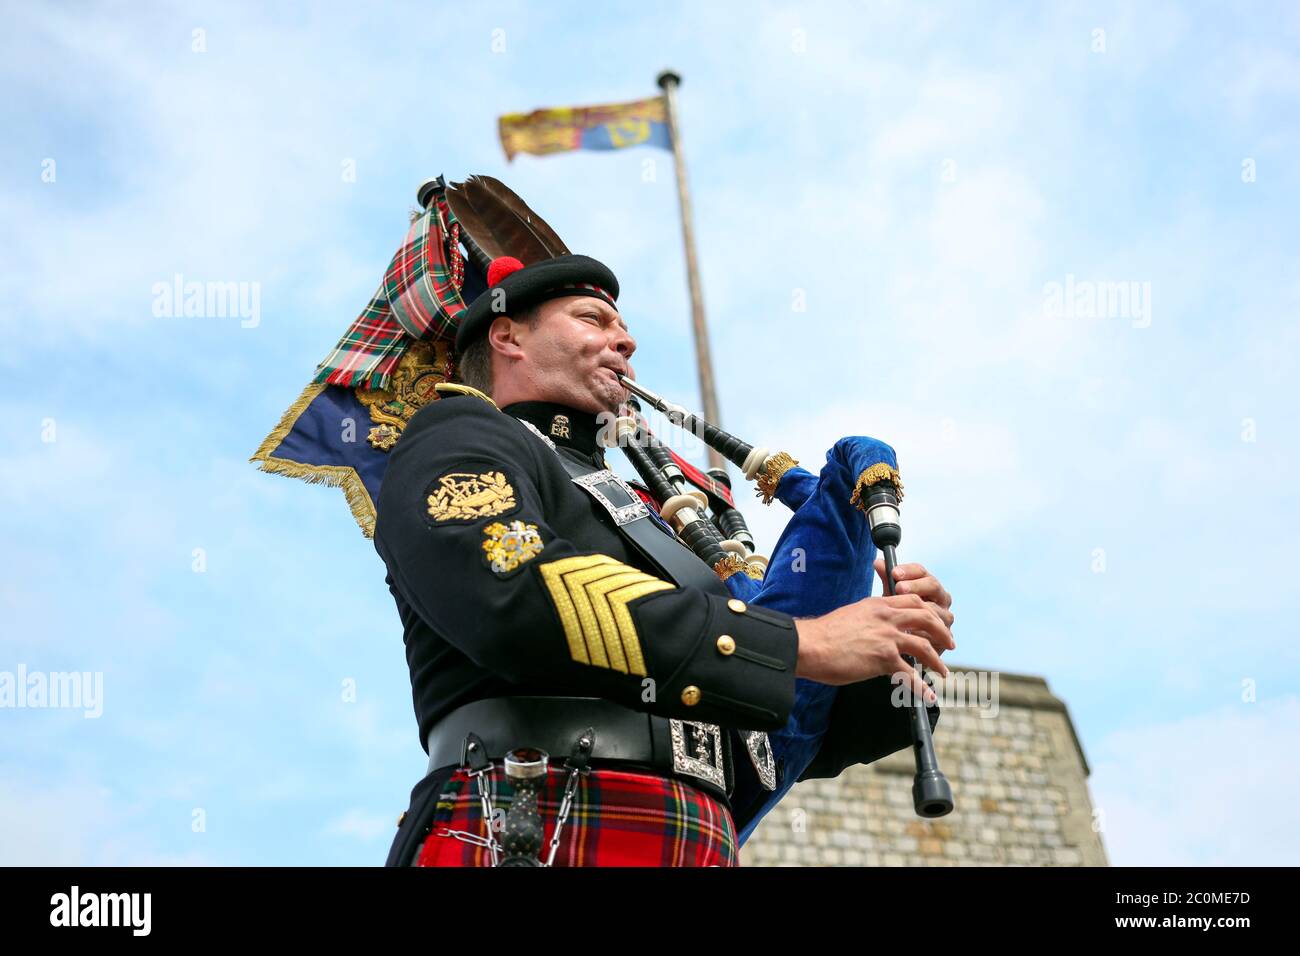 Her Majesty The Queen's Piper, Pipe Major Richard Grisdale, of The Royal Regiment of Scotland, on top of the Round Tower at Windsor Castle, joining pipers and musicians in marking the Battle of St Valery-en-Caux, where he played the pipers' march Heroes of St Valery to commemorate the thousands of Scots who were killed or captured during "the forgotten Dunkirk" 80 years ago. Stock Photo